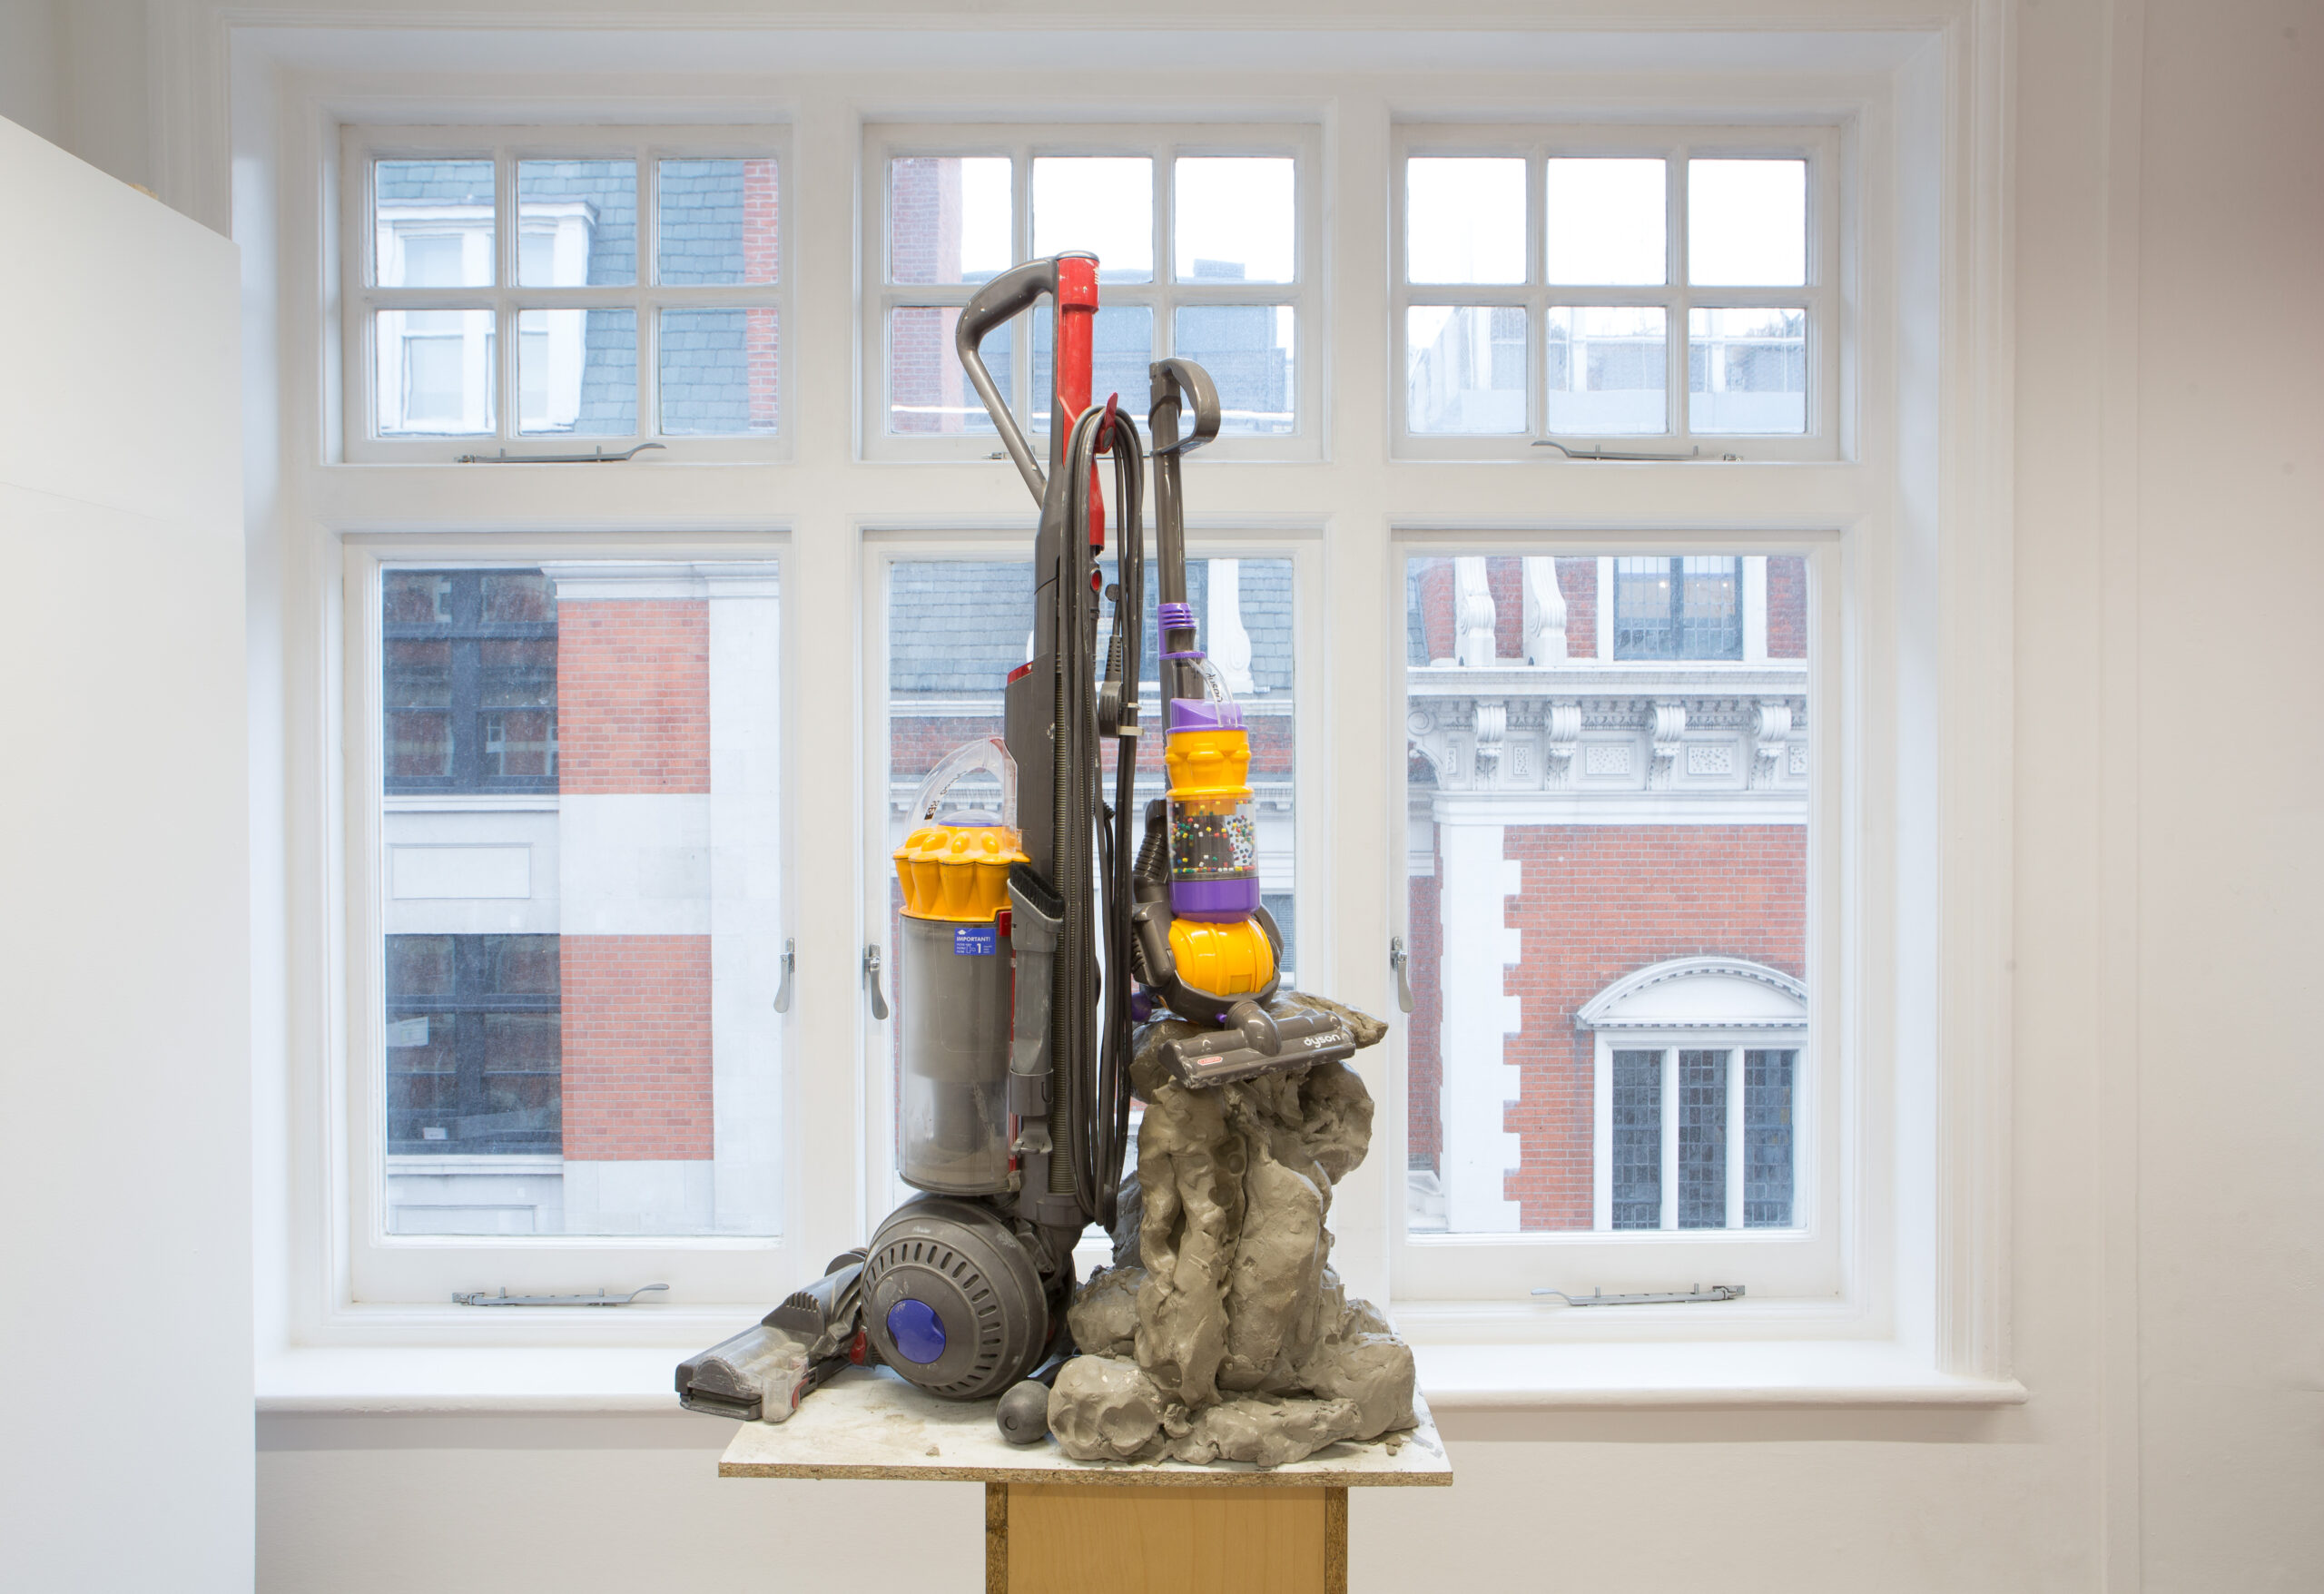 Harley Kuyck-Cohen Art Deco (2021) Dyson Hoover, toy hoover and Clay, 93 cm x 70 cm x 70 cm.